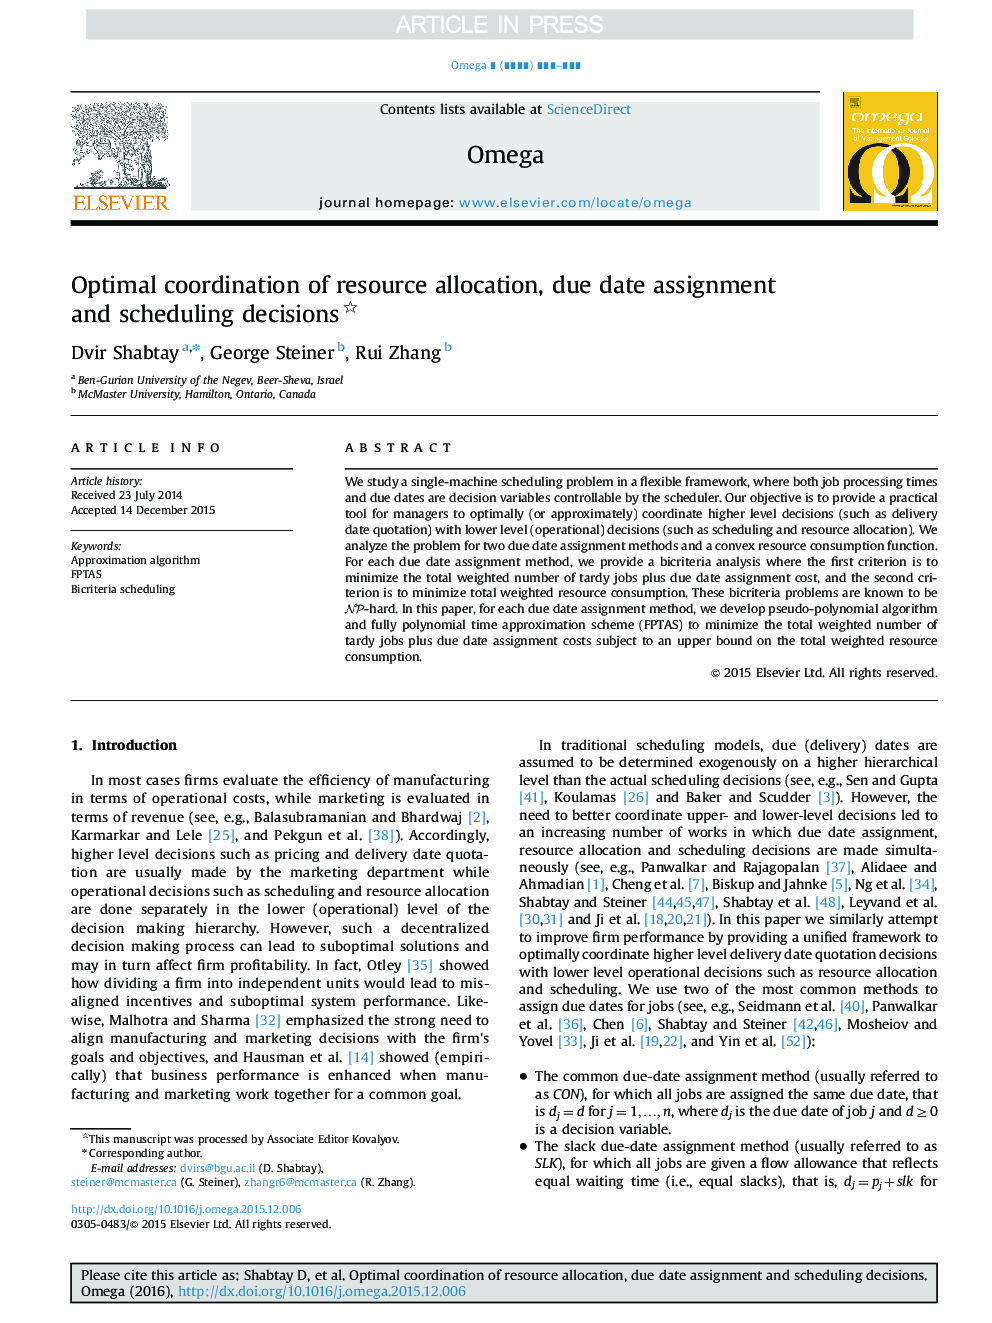 Optimal coordination of resource allocation, due date assignment and scheduling decisions